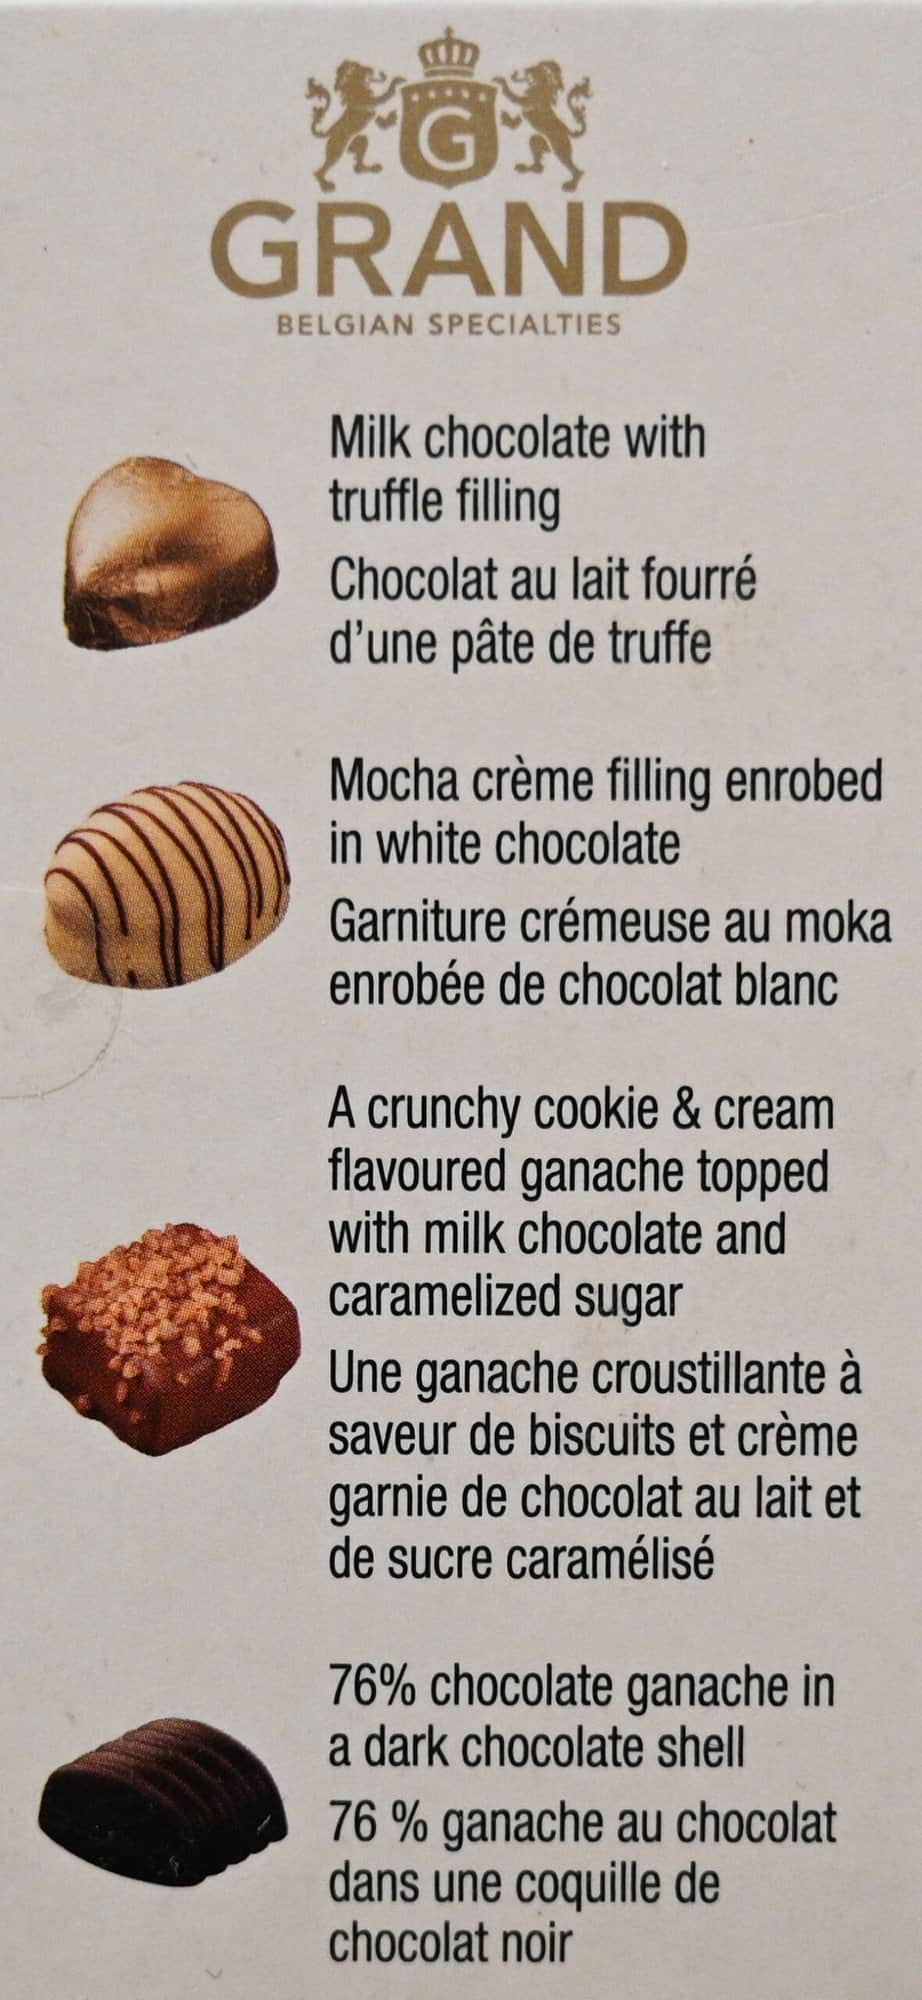 Image of the product description on the box of the four different kinds of chocolates.